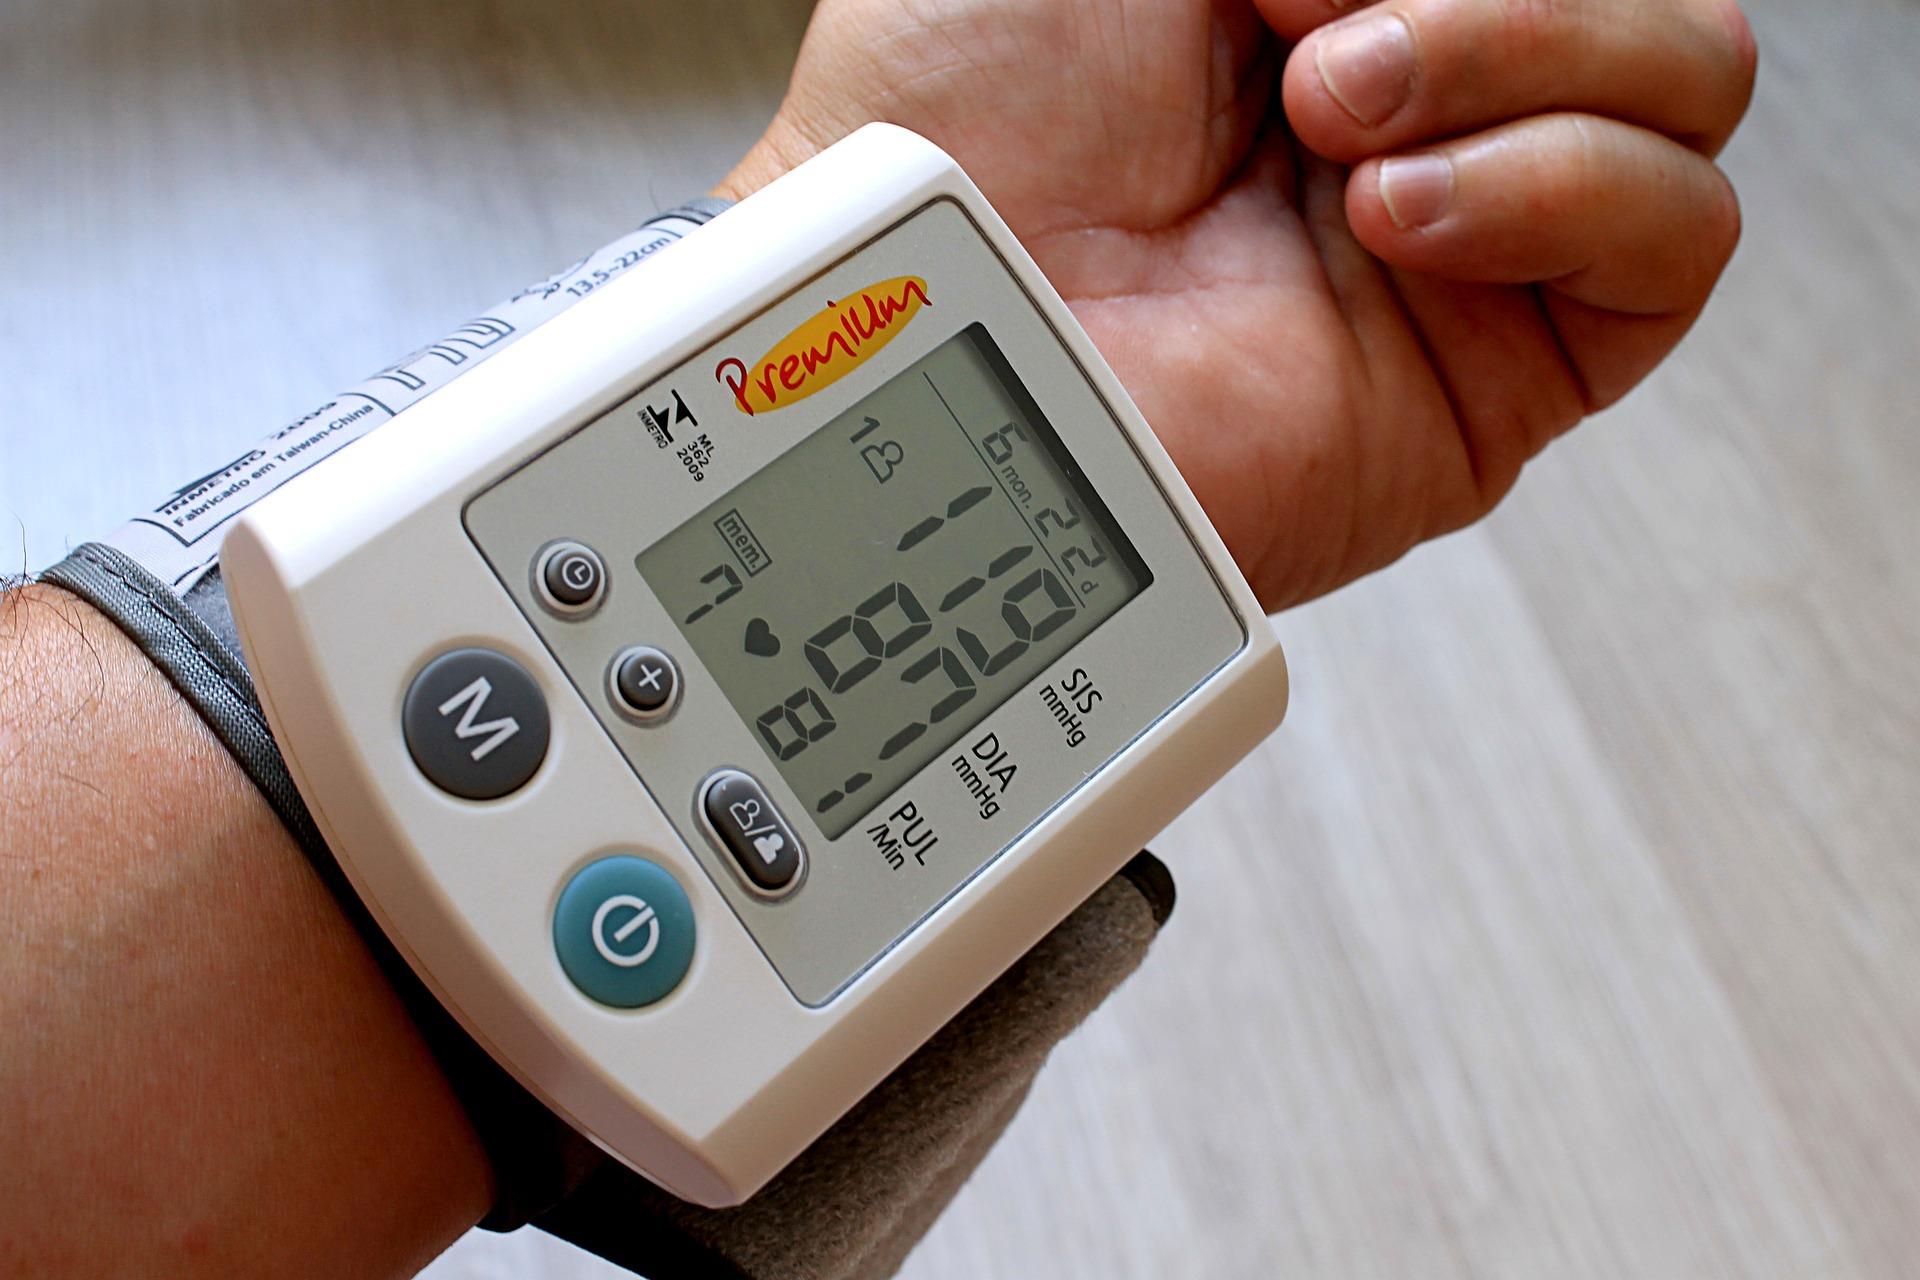 Dr. Holly Kramer recommends people interested in starting an intensive systolic blood pressure lowering program speak with their doctors and “weigh the risks and the benefits.” (Pixabay)